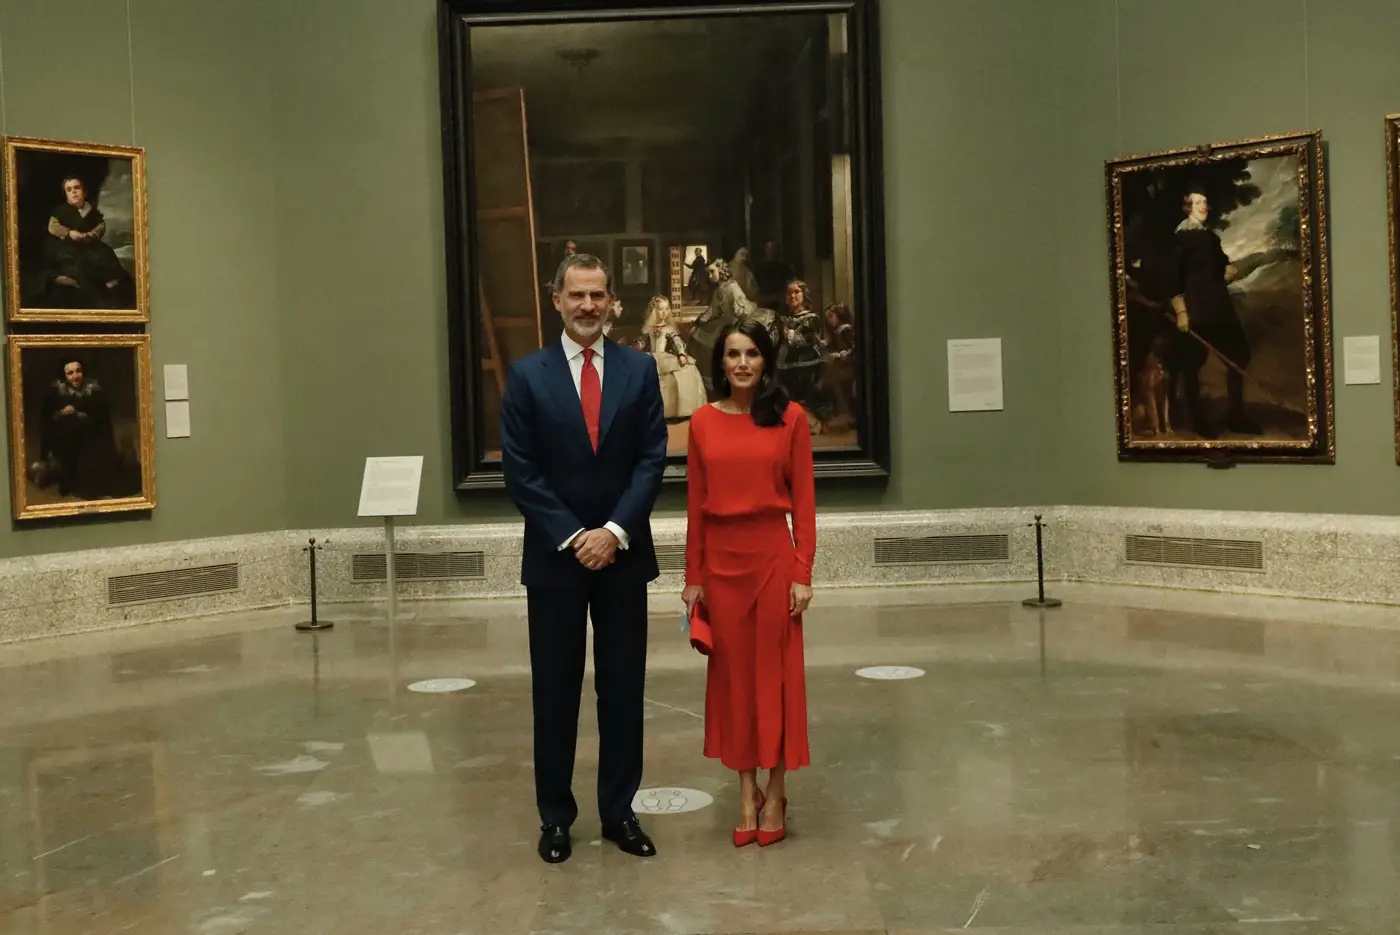 King Felipe and Queen Letizia of Spain photographer at the Prado Museum with Las Meninas by Velázquez in the background